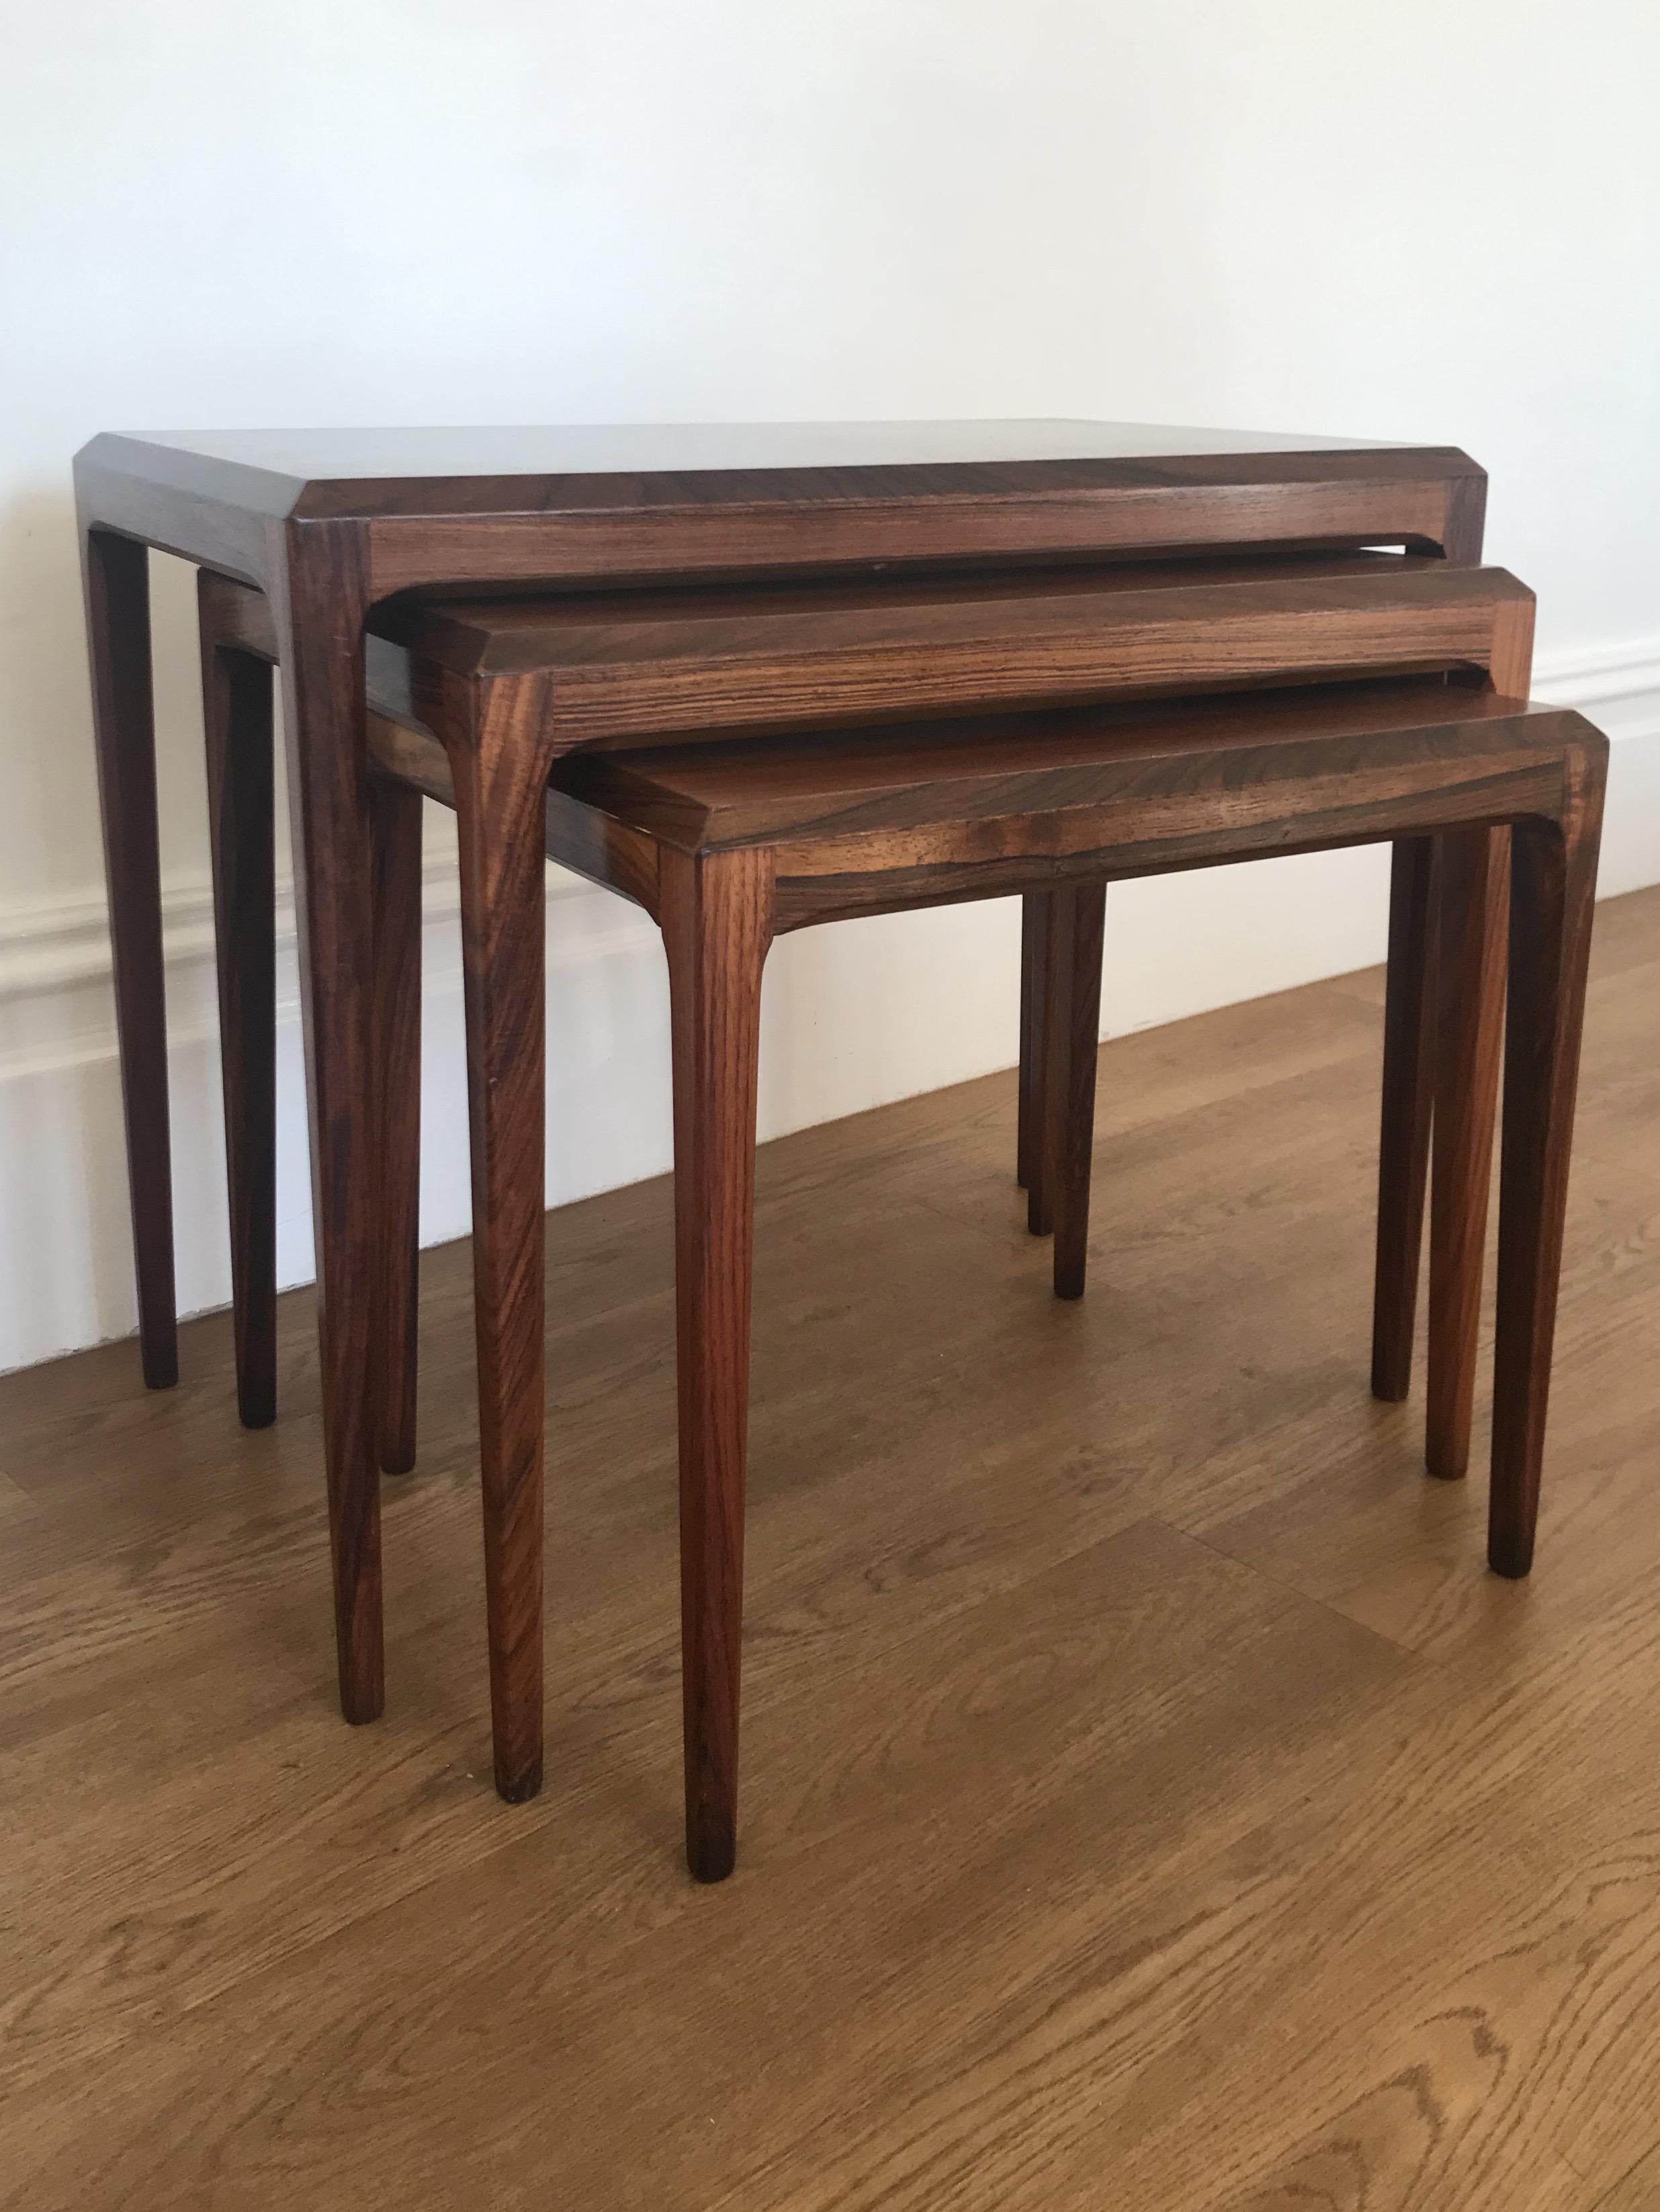 Set of 3 superbly designed rosewood tables designed by Johannes Andersen for CFC Silkeborg, Denmark.

The tables feature tapered octagonal legs with chamfered tops and a lovely rosewood grain running throughout.

The tables are in very good